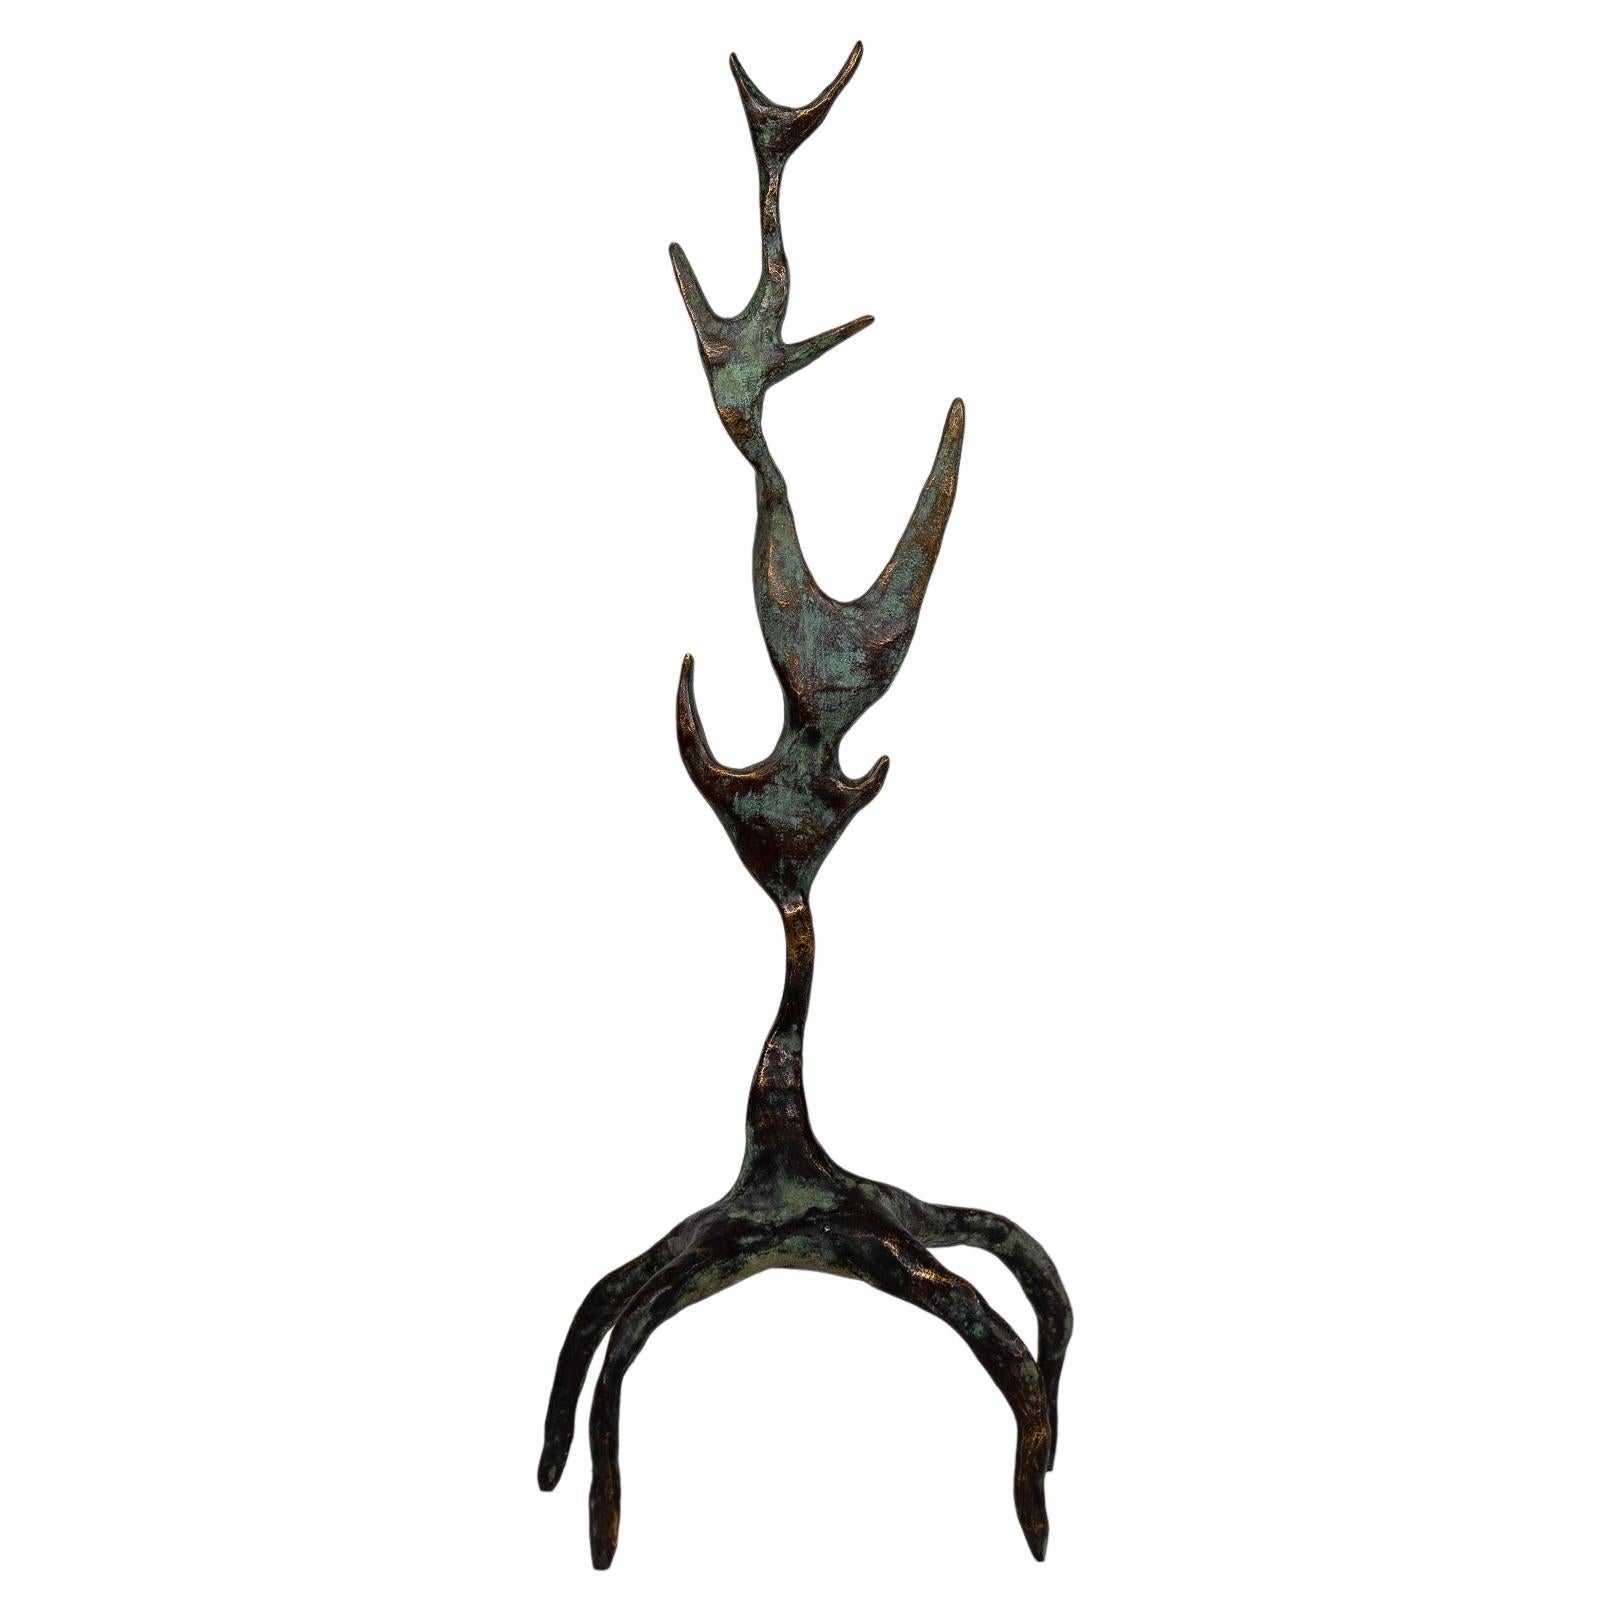 Gossamer Bronze Sculpture by Sol Bailey Barker, Represented by Tuleste Factory For Sale